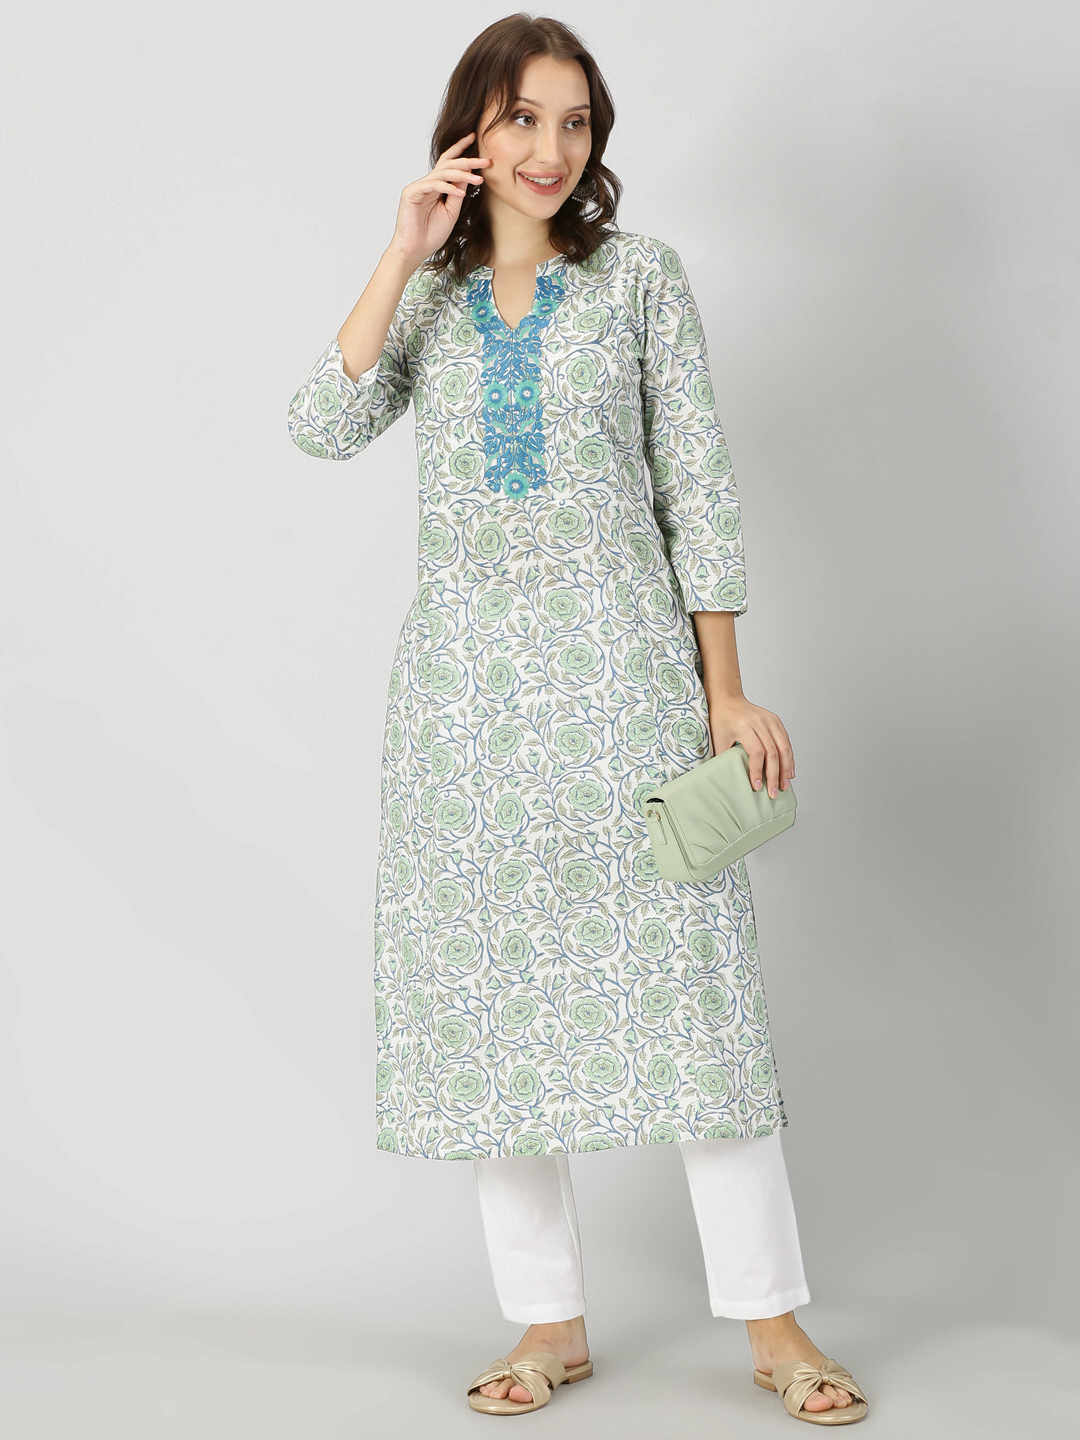 White-Green Floral Print Kurta with Neck Embroidery